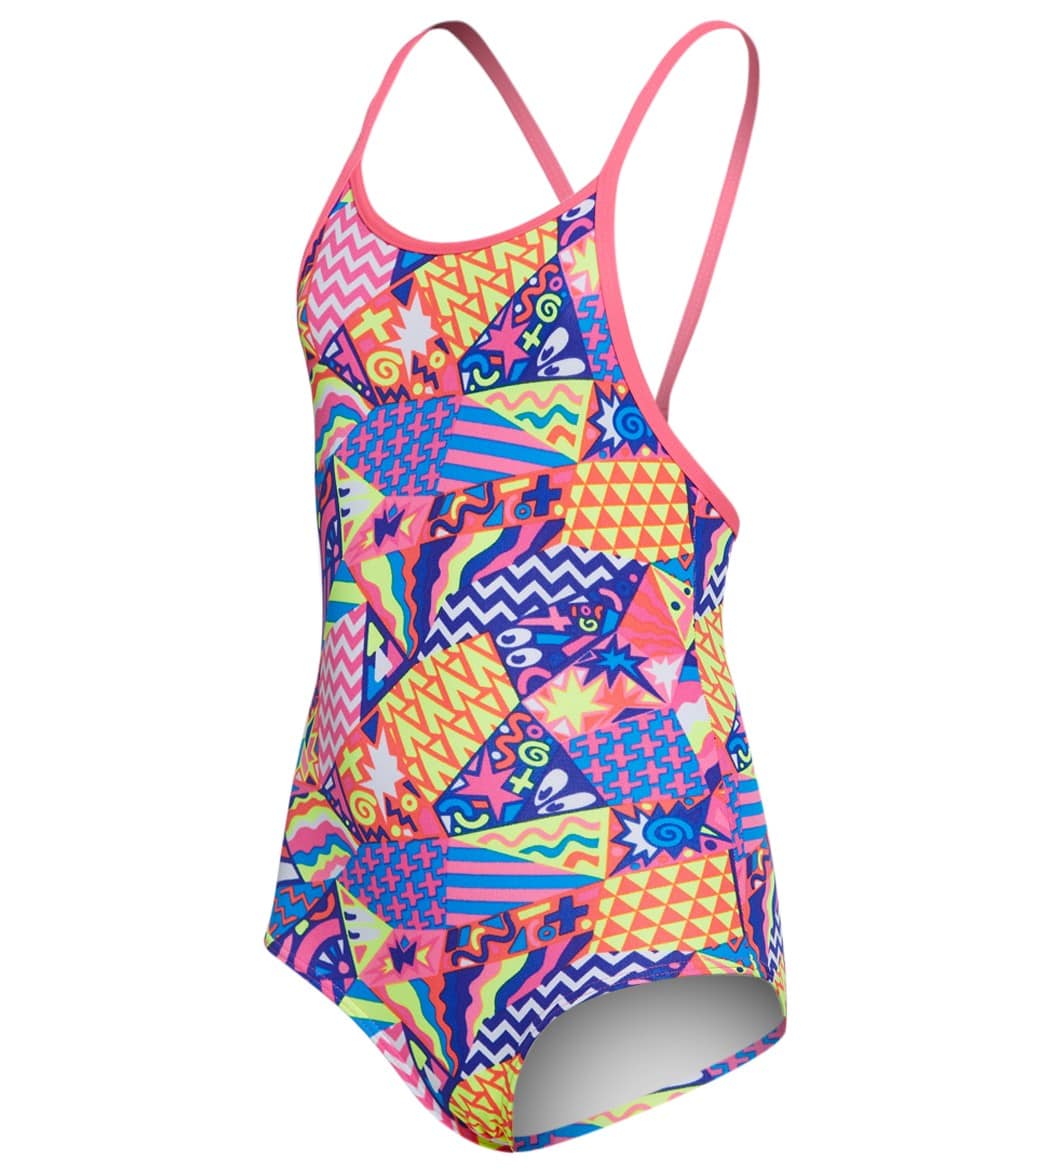 Funkita Toddler Girls' Bee Bop Printed One Piece Swimsuit - Multi Pink 1 Polyester - Swimoutlet.com